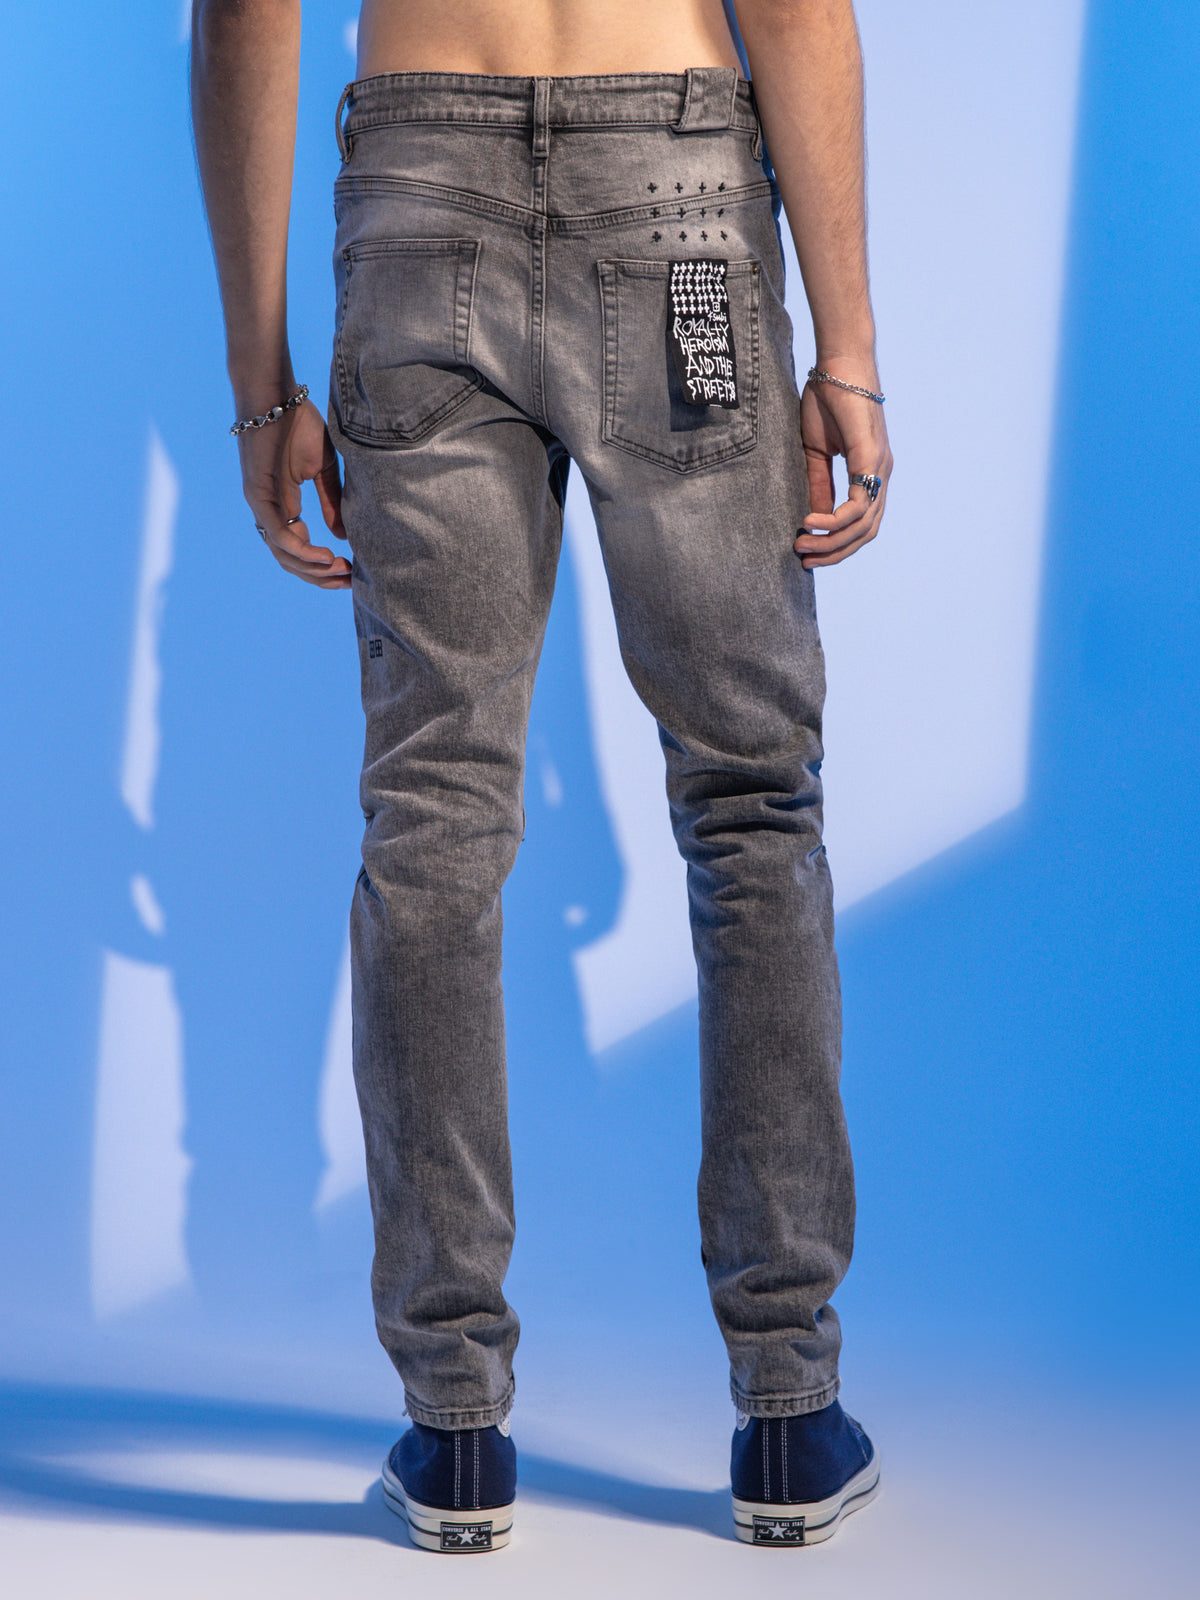 Chitch Slim Fit Jeans in Sott Grey